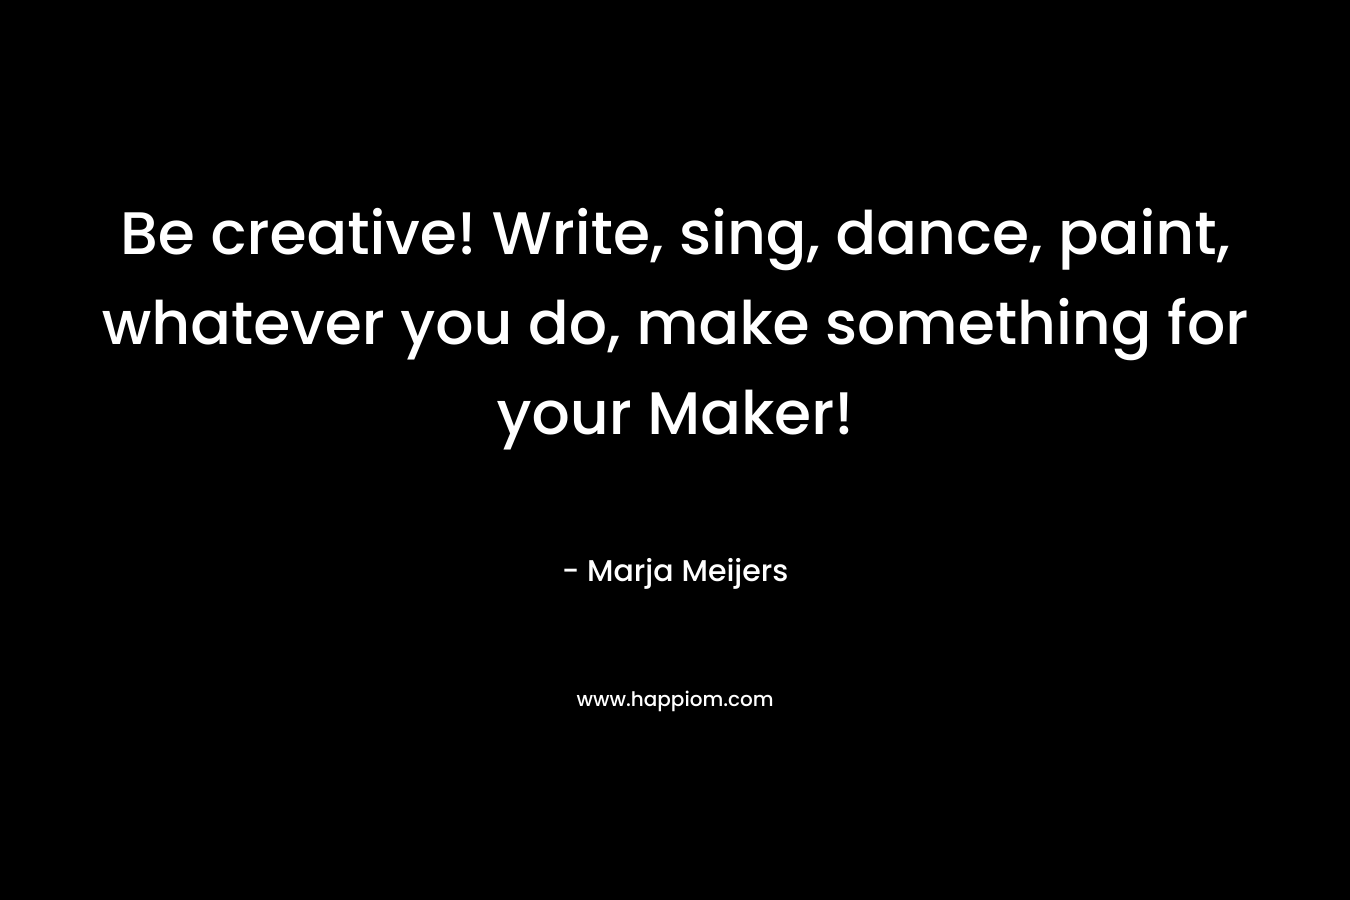 Be creative! Write, sing, dance, paint, whatever you do, make something for your Maker! – Marja Meijers